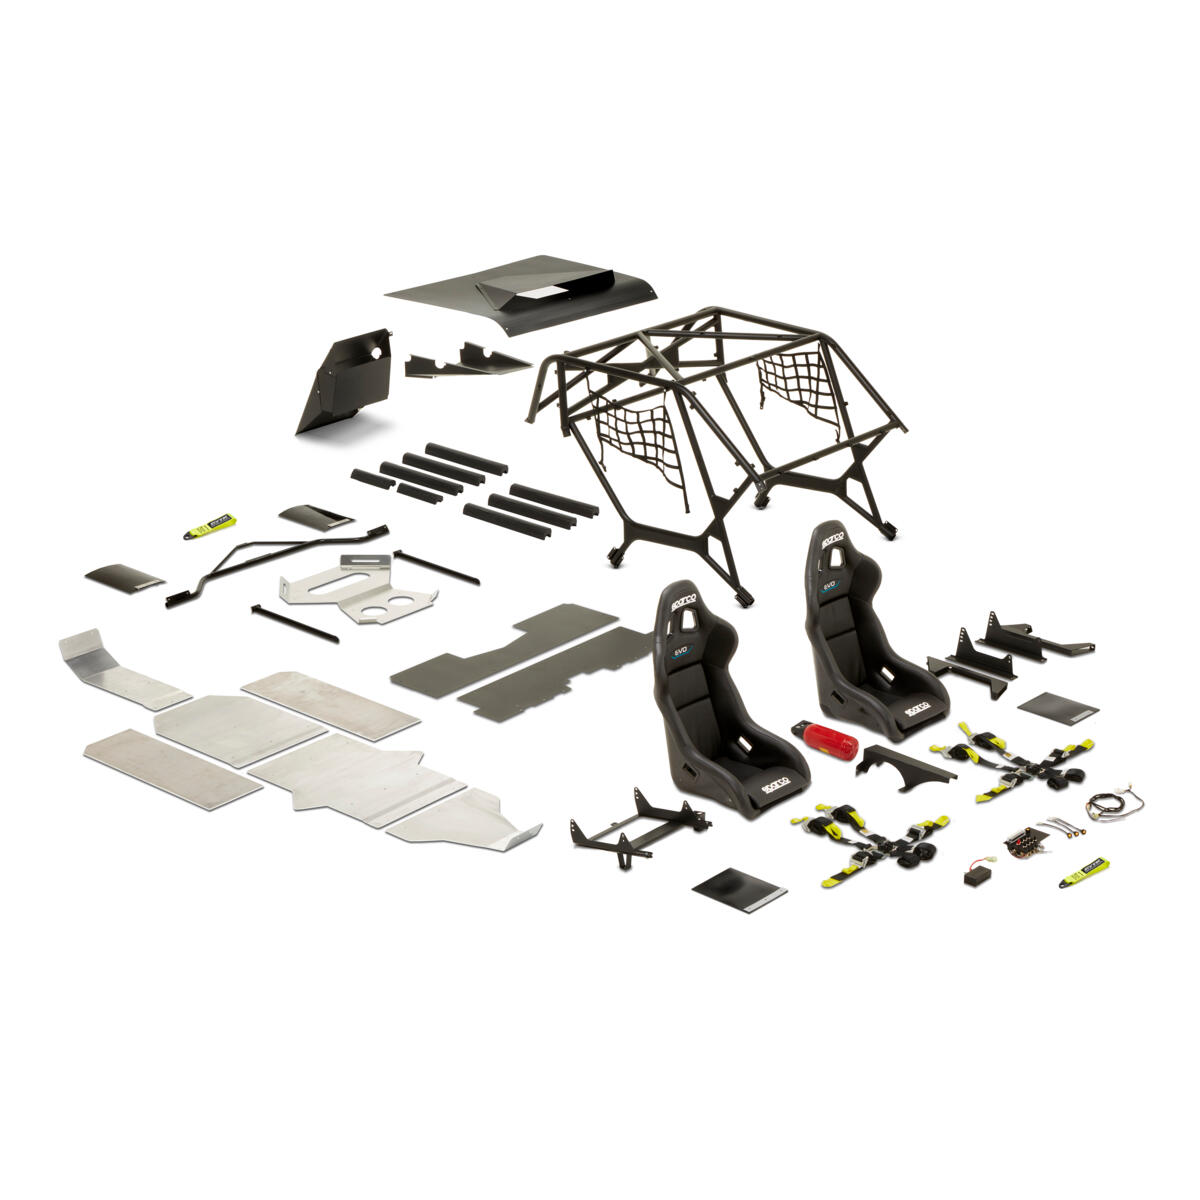 The GYTR® Racing Kit stage 1 (MY19-Current) includes all mandatory equipment based on the FIA (Fédération Internationale de l’Automobile) T4 regulations for Side-by-Sides. Equipped with this kit, the YXZ1000R is ready to compete in most competitions under National Sports Authorities and FIM.
Thanks to the plug-and-play design, no welding or modifications to the chassis are required. Together with the full assembly instructions, this allows any Yamaha SSV dealer or experienced mechanic to finish installation in about 16 hours.
The GYTR Racing Kit opens up a new world of Rally racing and offers a strong base for further improving skills and vehicle performance, for entry-level and experienced drivers.
This Stage 1 kit is developed for models with a rear-mounted radiator and is suitable for YXZ1000R models after and including MY2019.

The kit contains: